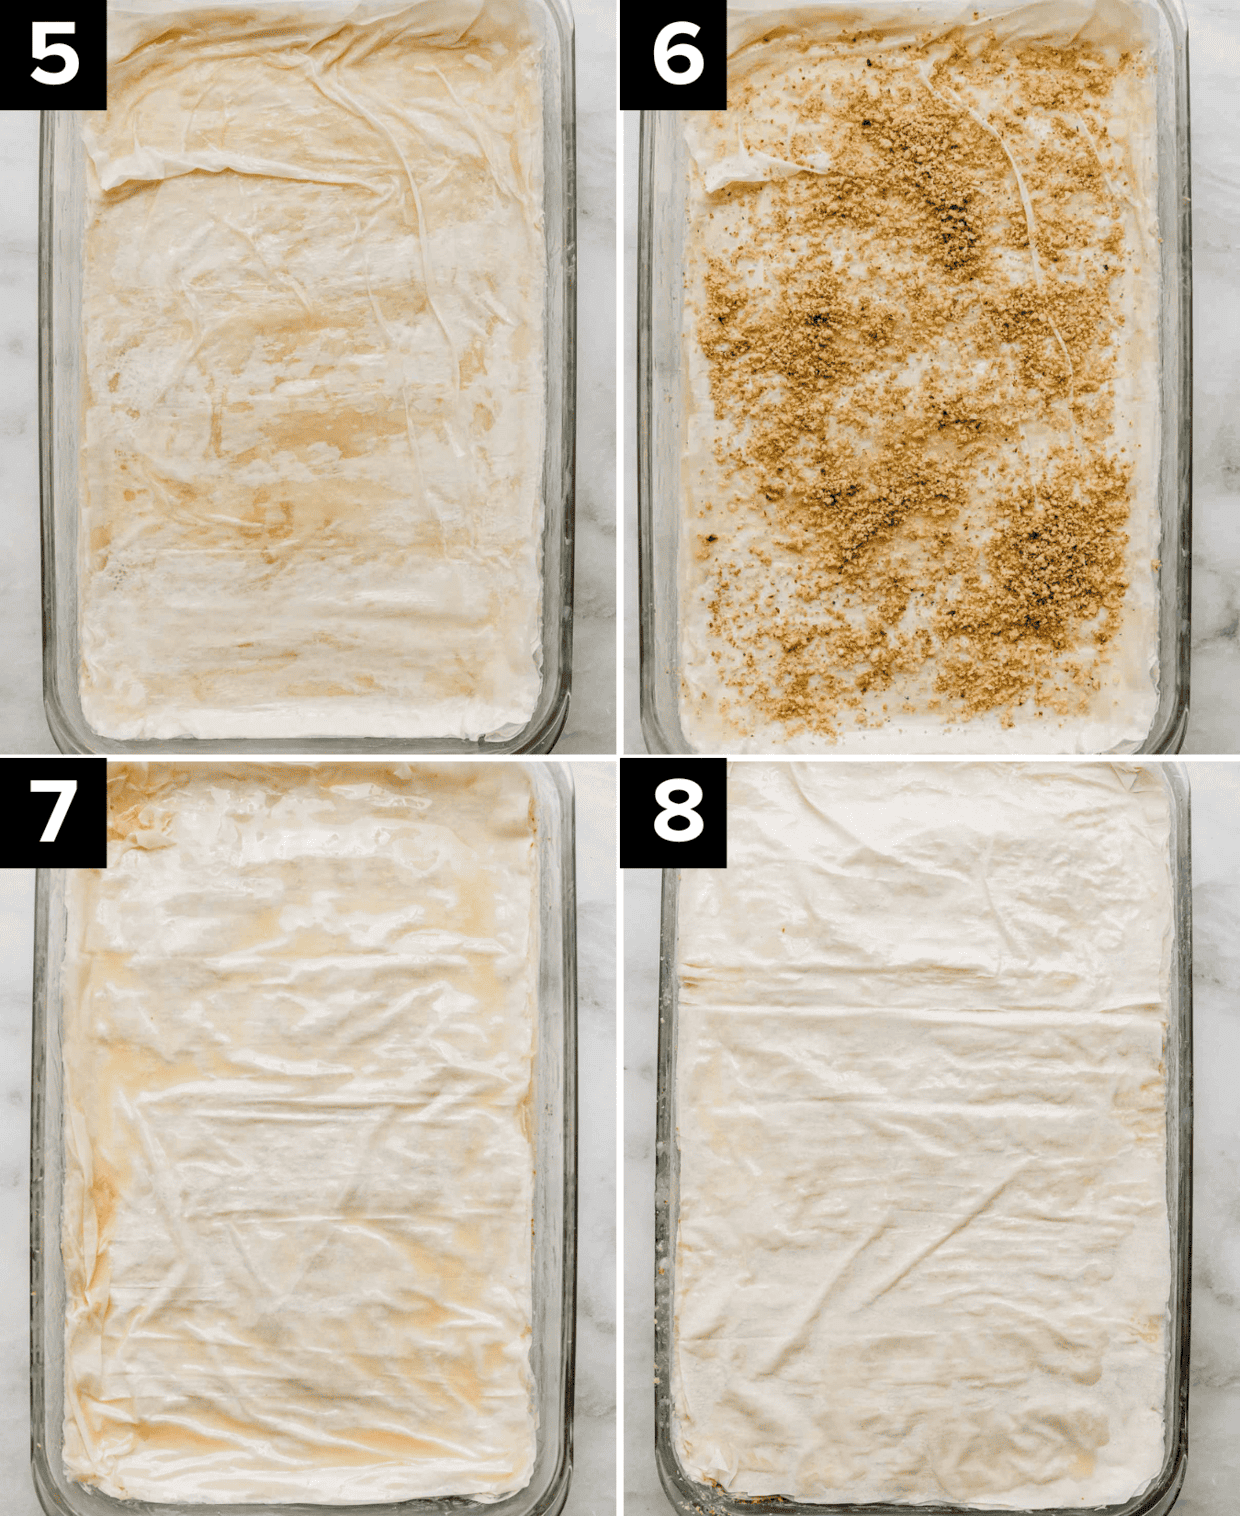 Process of how to make Greek Baklava, top left image is phyllo dough in rectangle pan, top right image shows small amount of ground walnuts over phyllo dough, bottom left and right image both show phyllo dough in a rectangle pan.